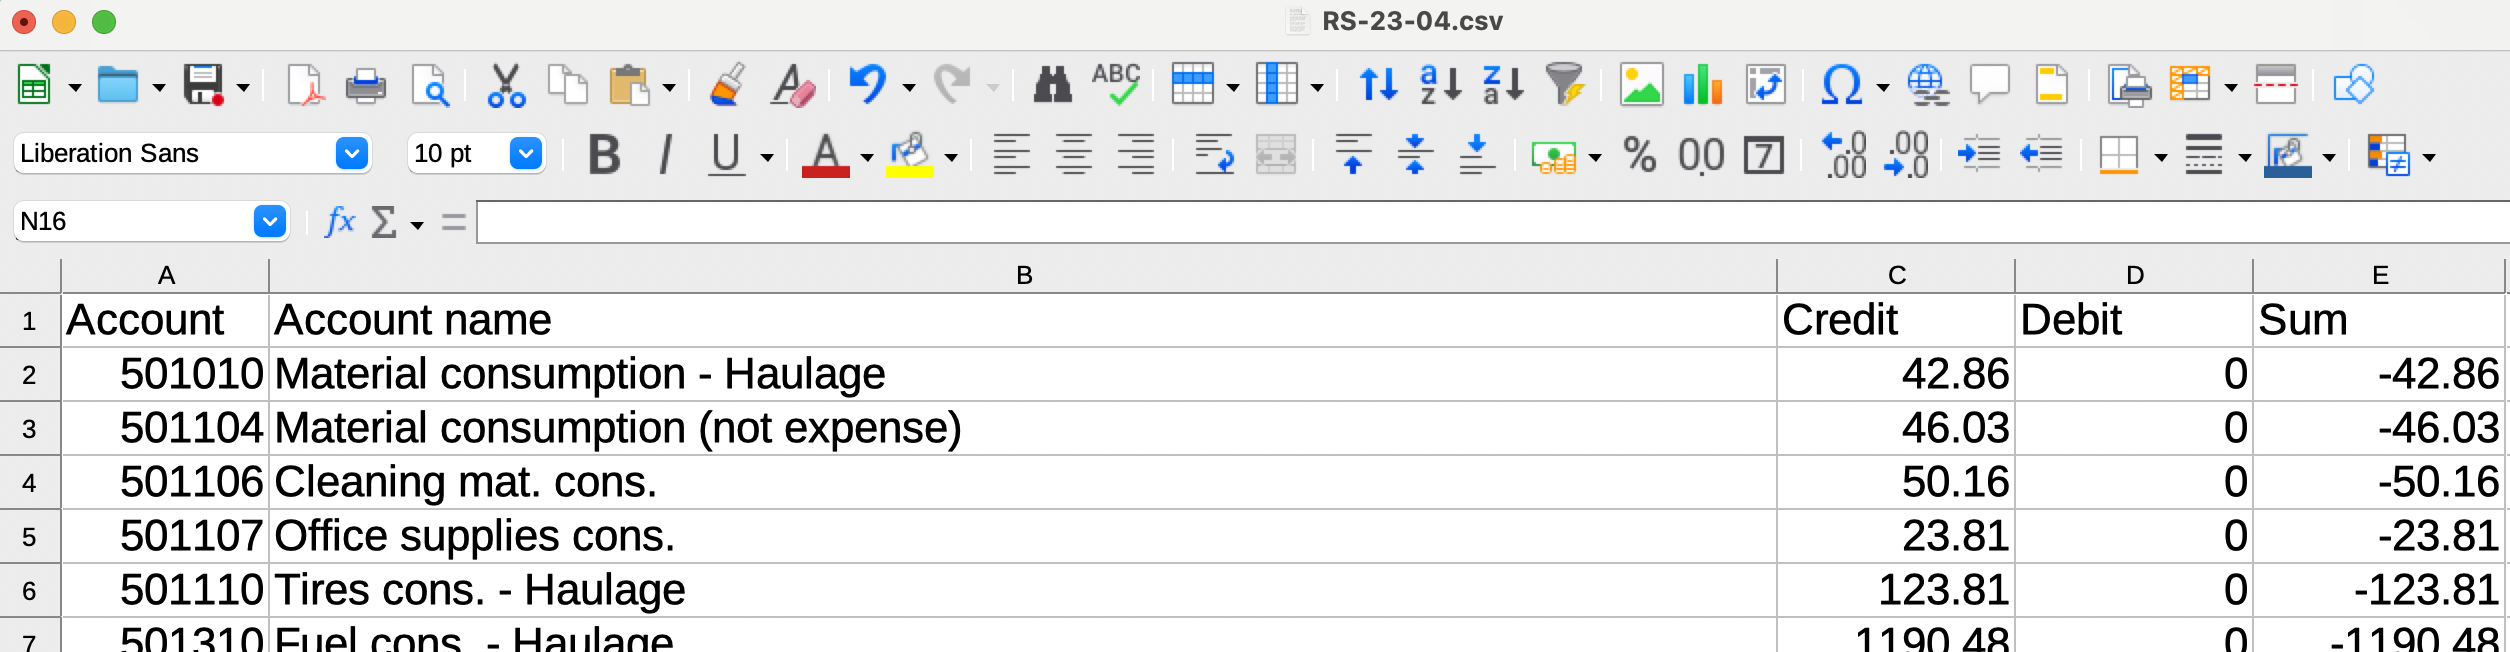 exported data can be updated in your favorite spreadsheet editor